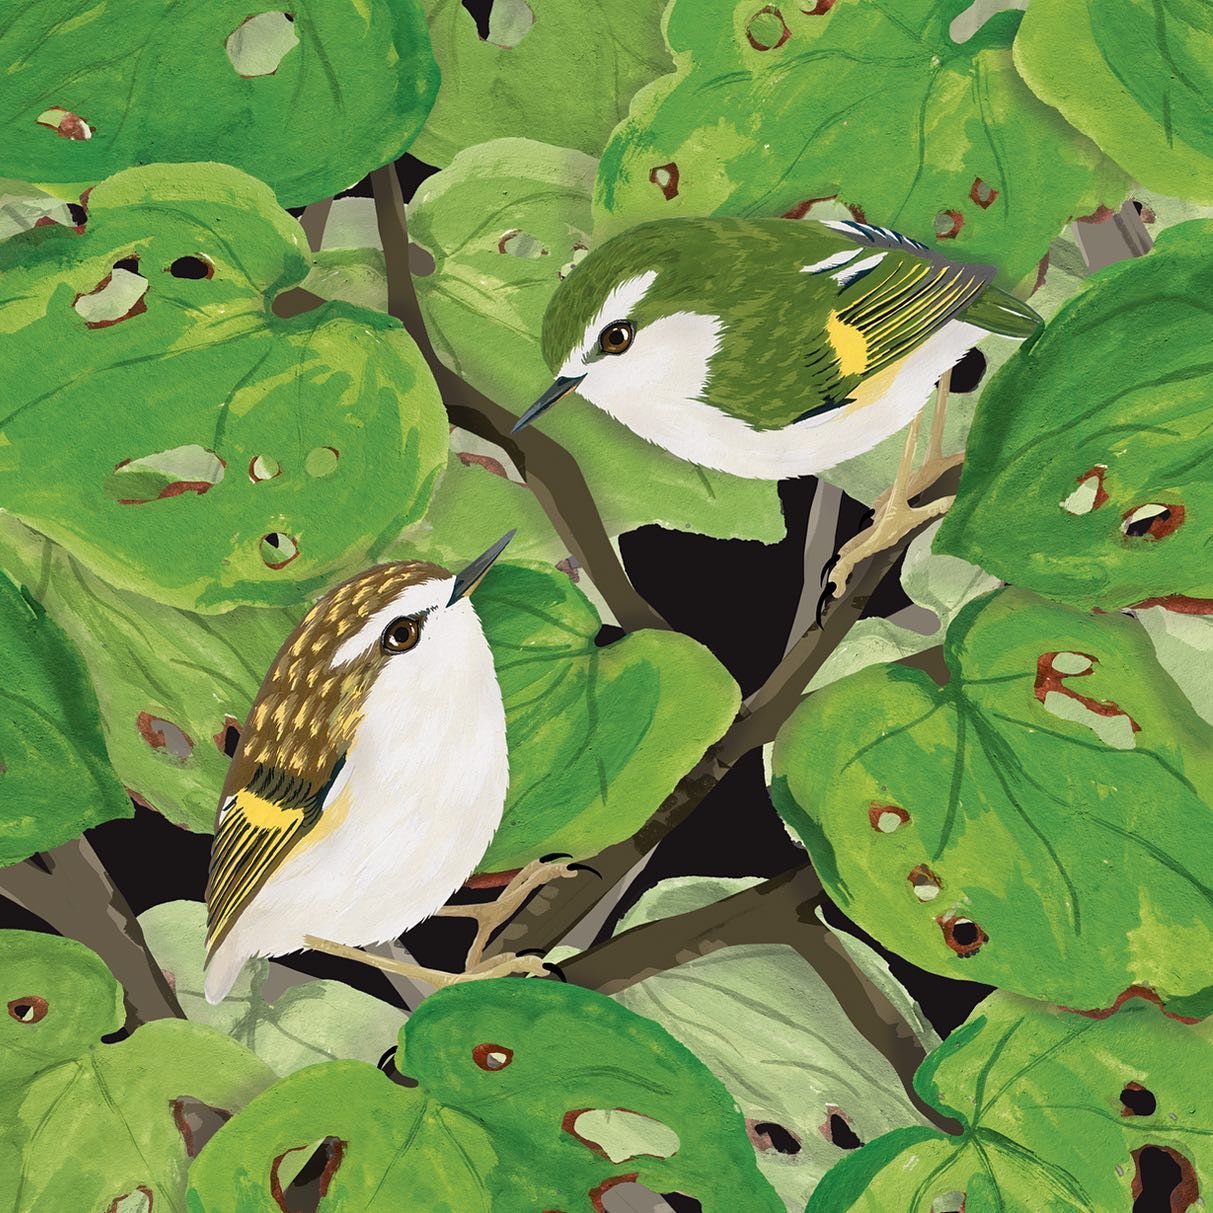 Sneaky peek at a new illustration 👀

These are of course my favourite birds in all the land, titipounamu / rifleman / tiny tree potatoes / clean green beans / tiny murder muffins.

I really love illustrating them, they have so many cute details! 🎨